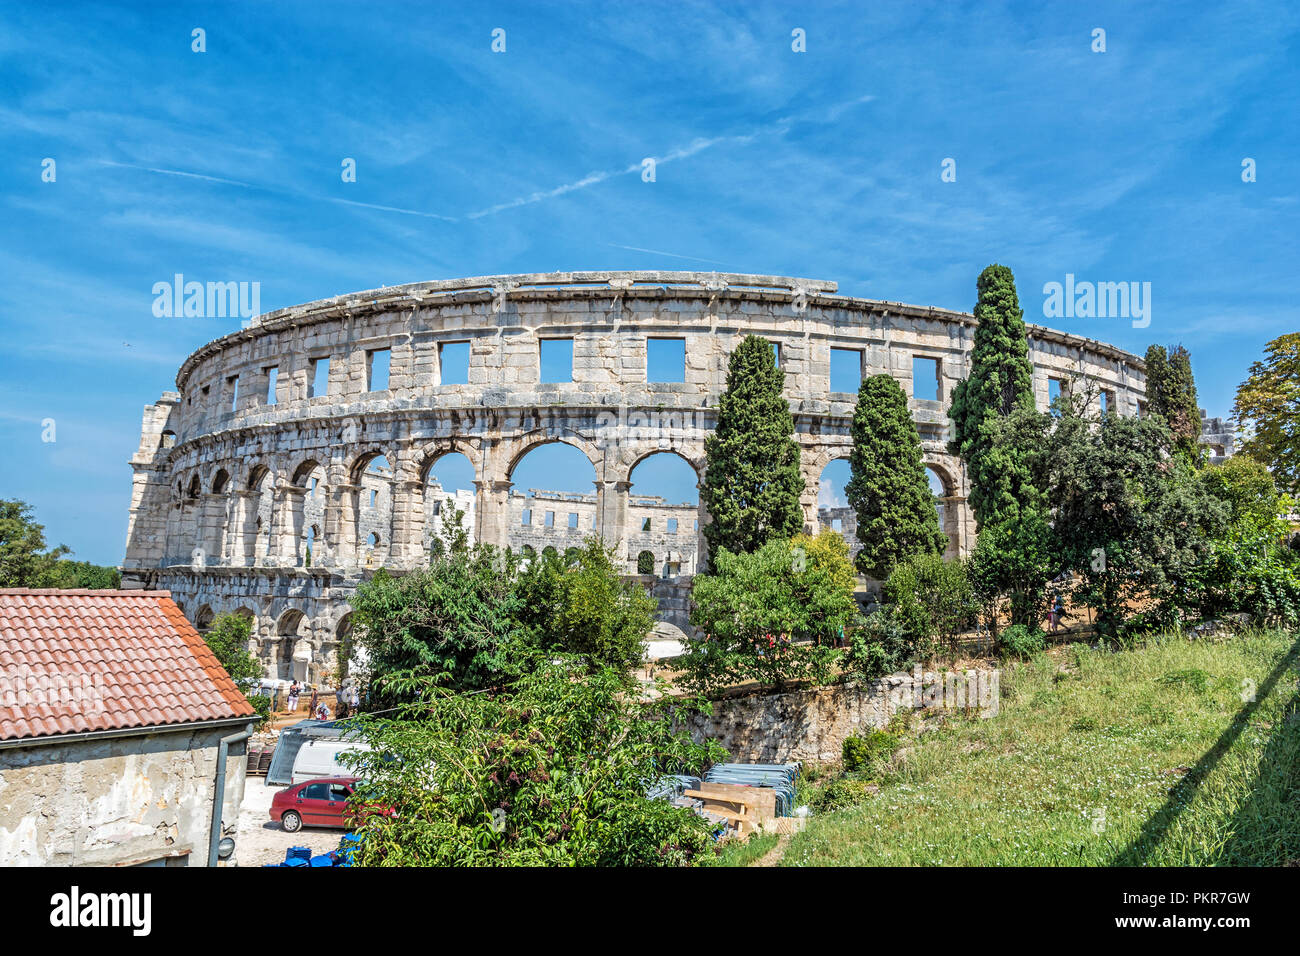 Ancient amphitheater located in Pula, Istria, Croatia. Travel destination. Famous object. Stock Photo